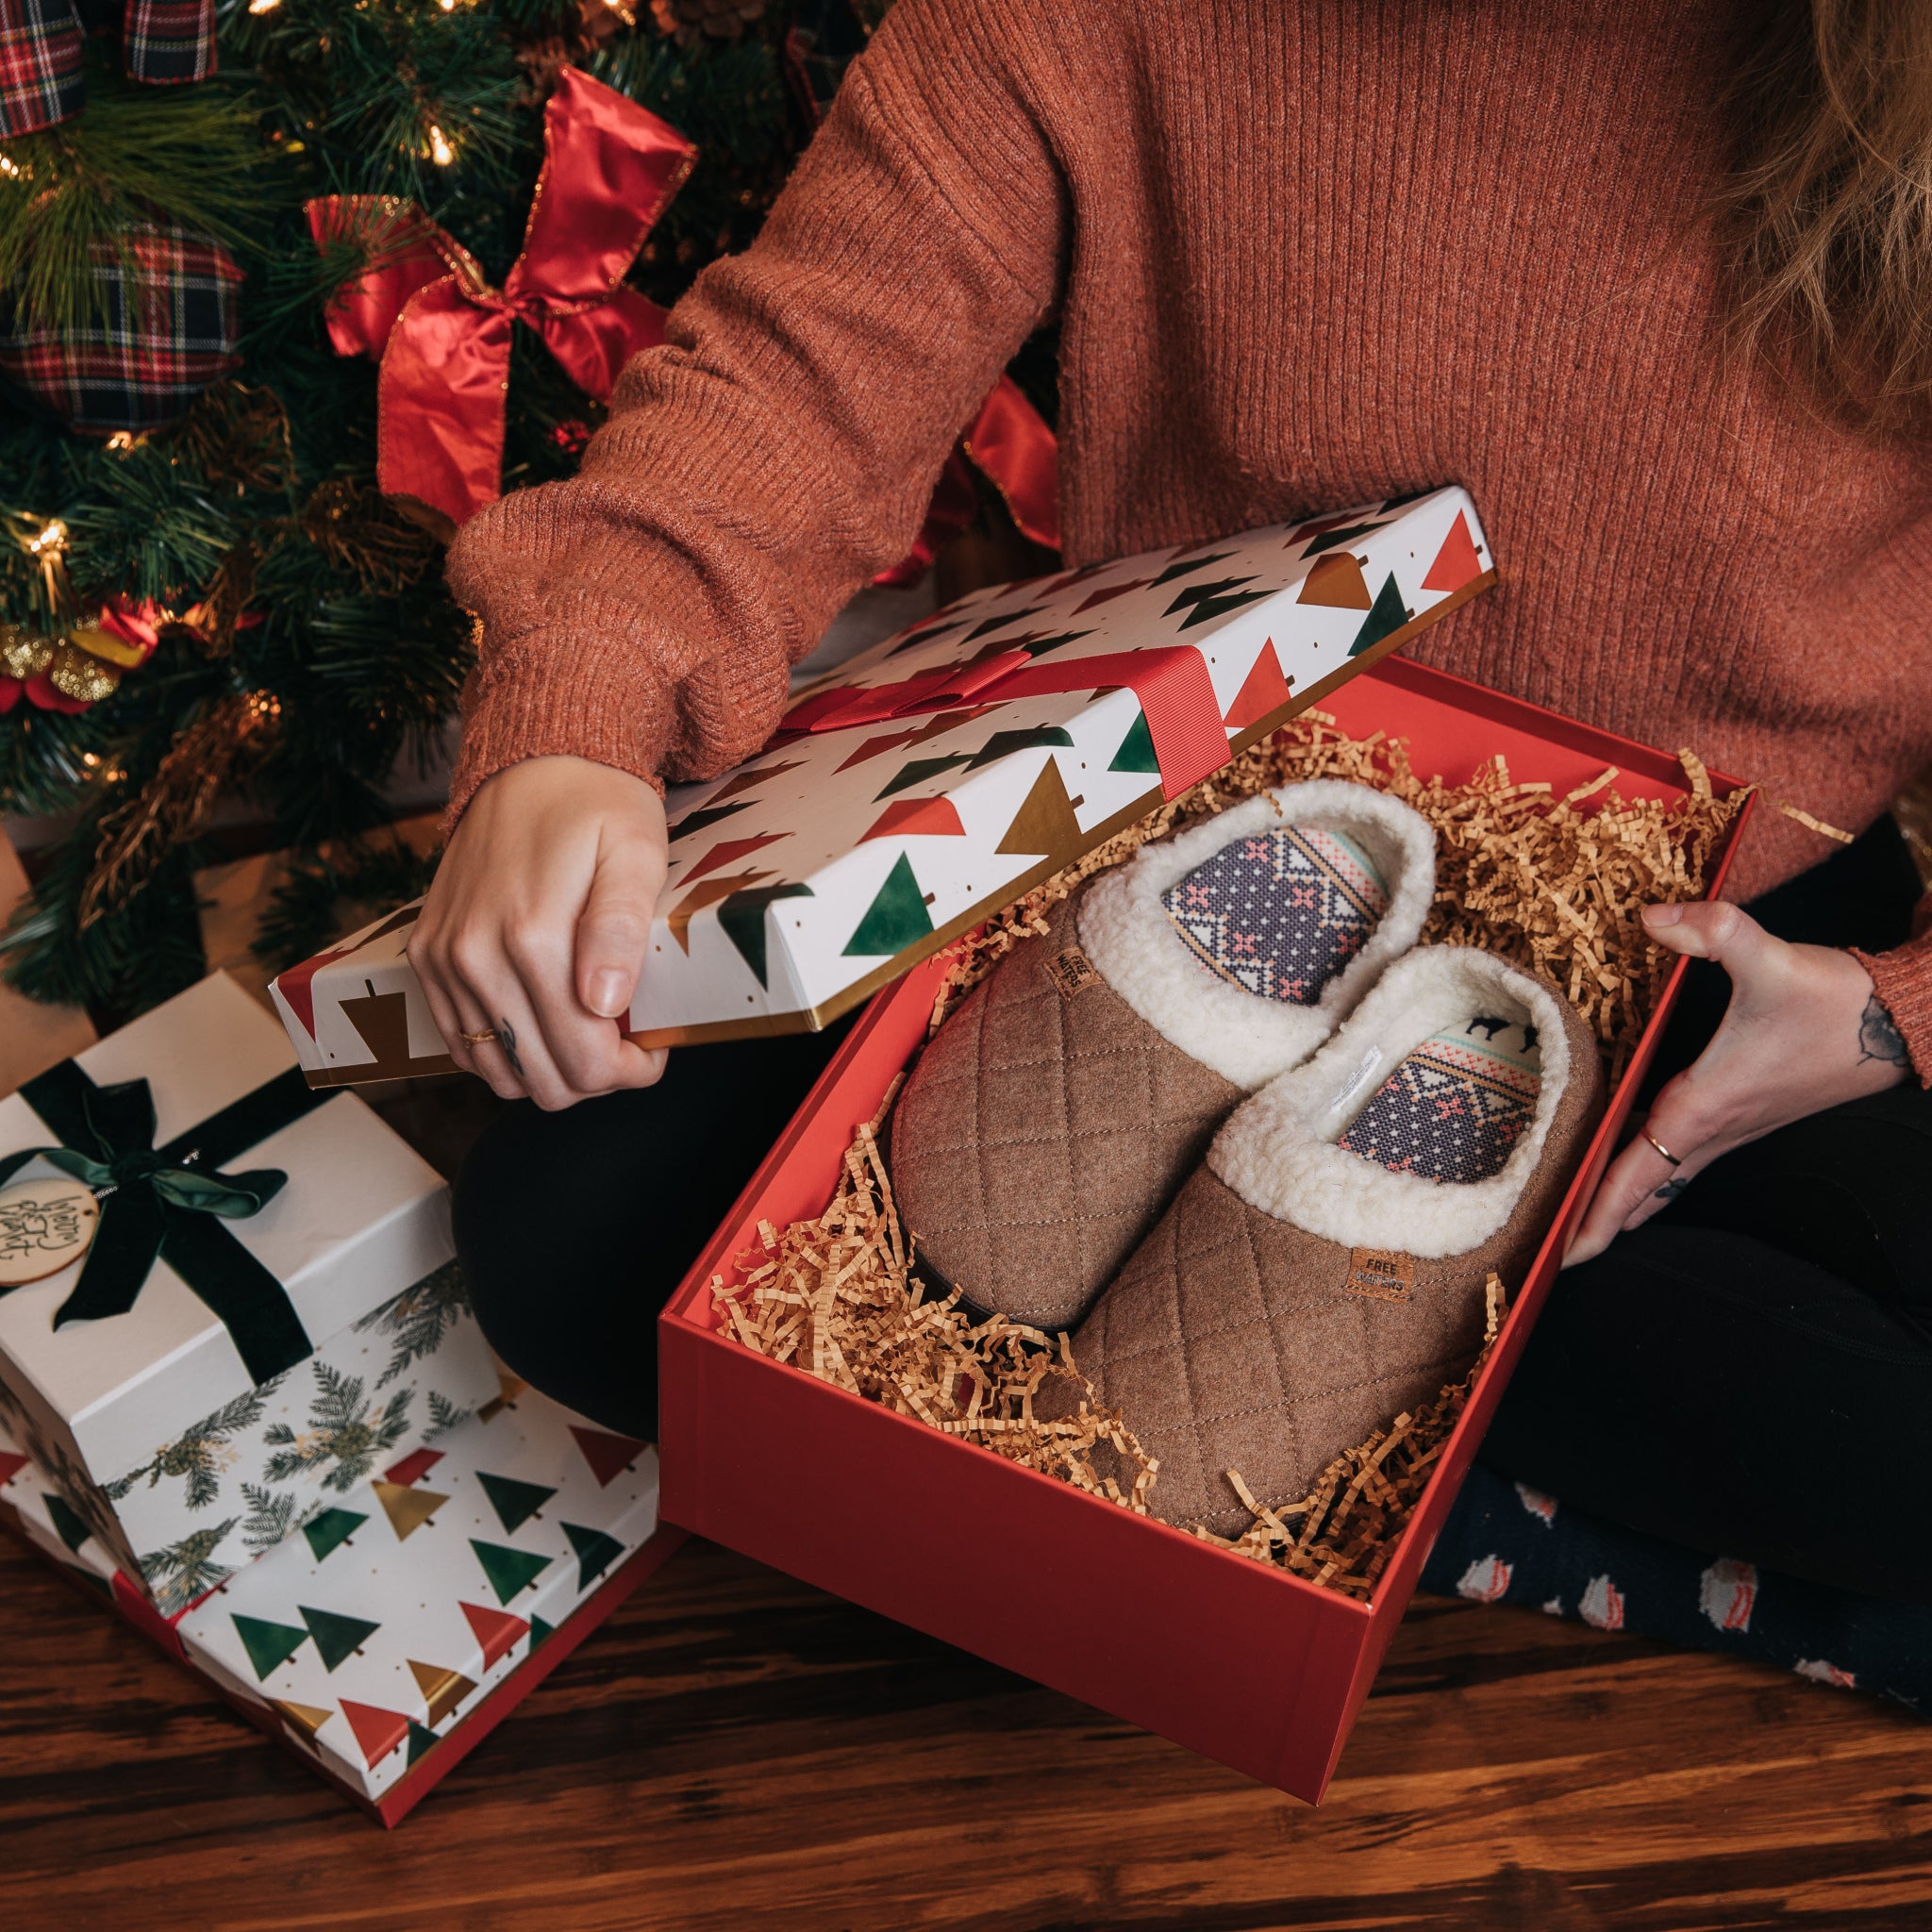 Women opening a gift with slippers inside box by a holiday tree